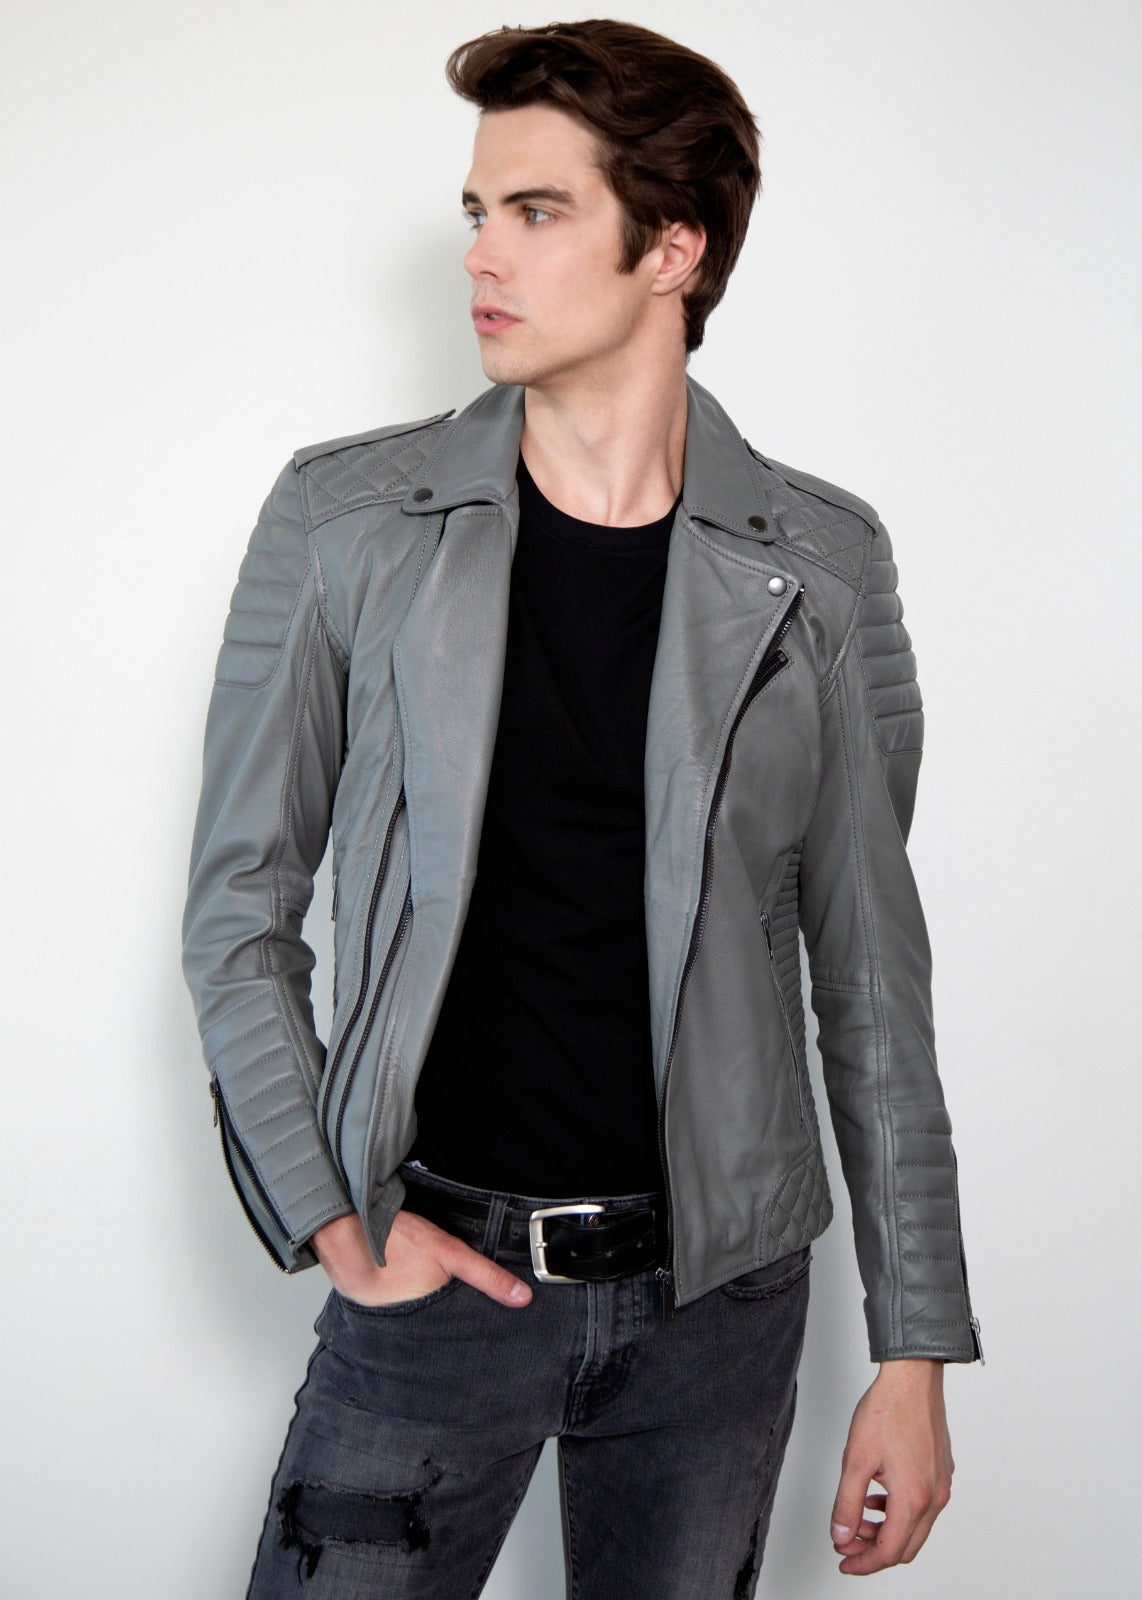 Mens Smooth Gray Motorcycle leather Jacket